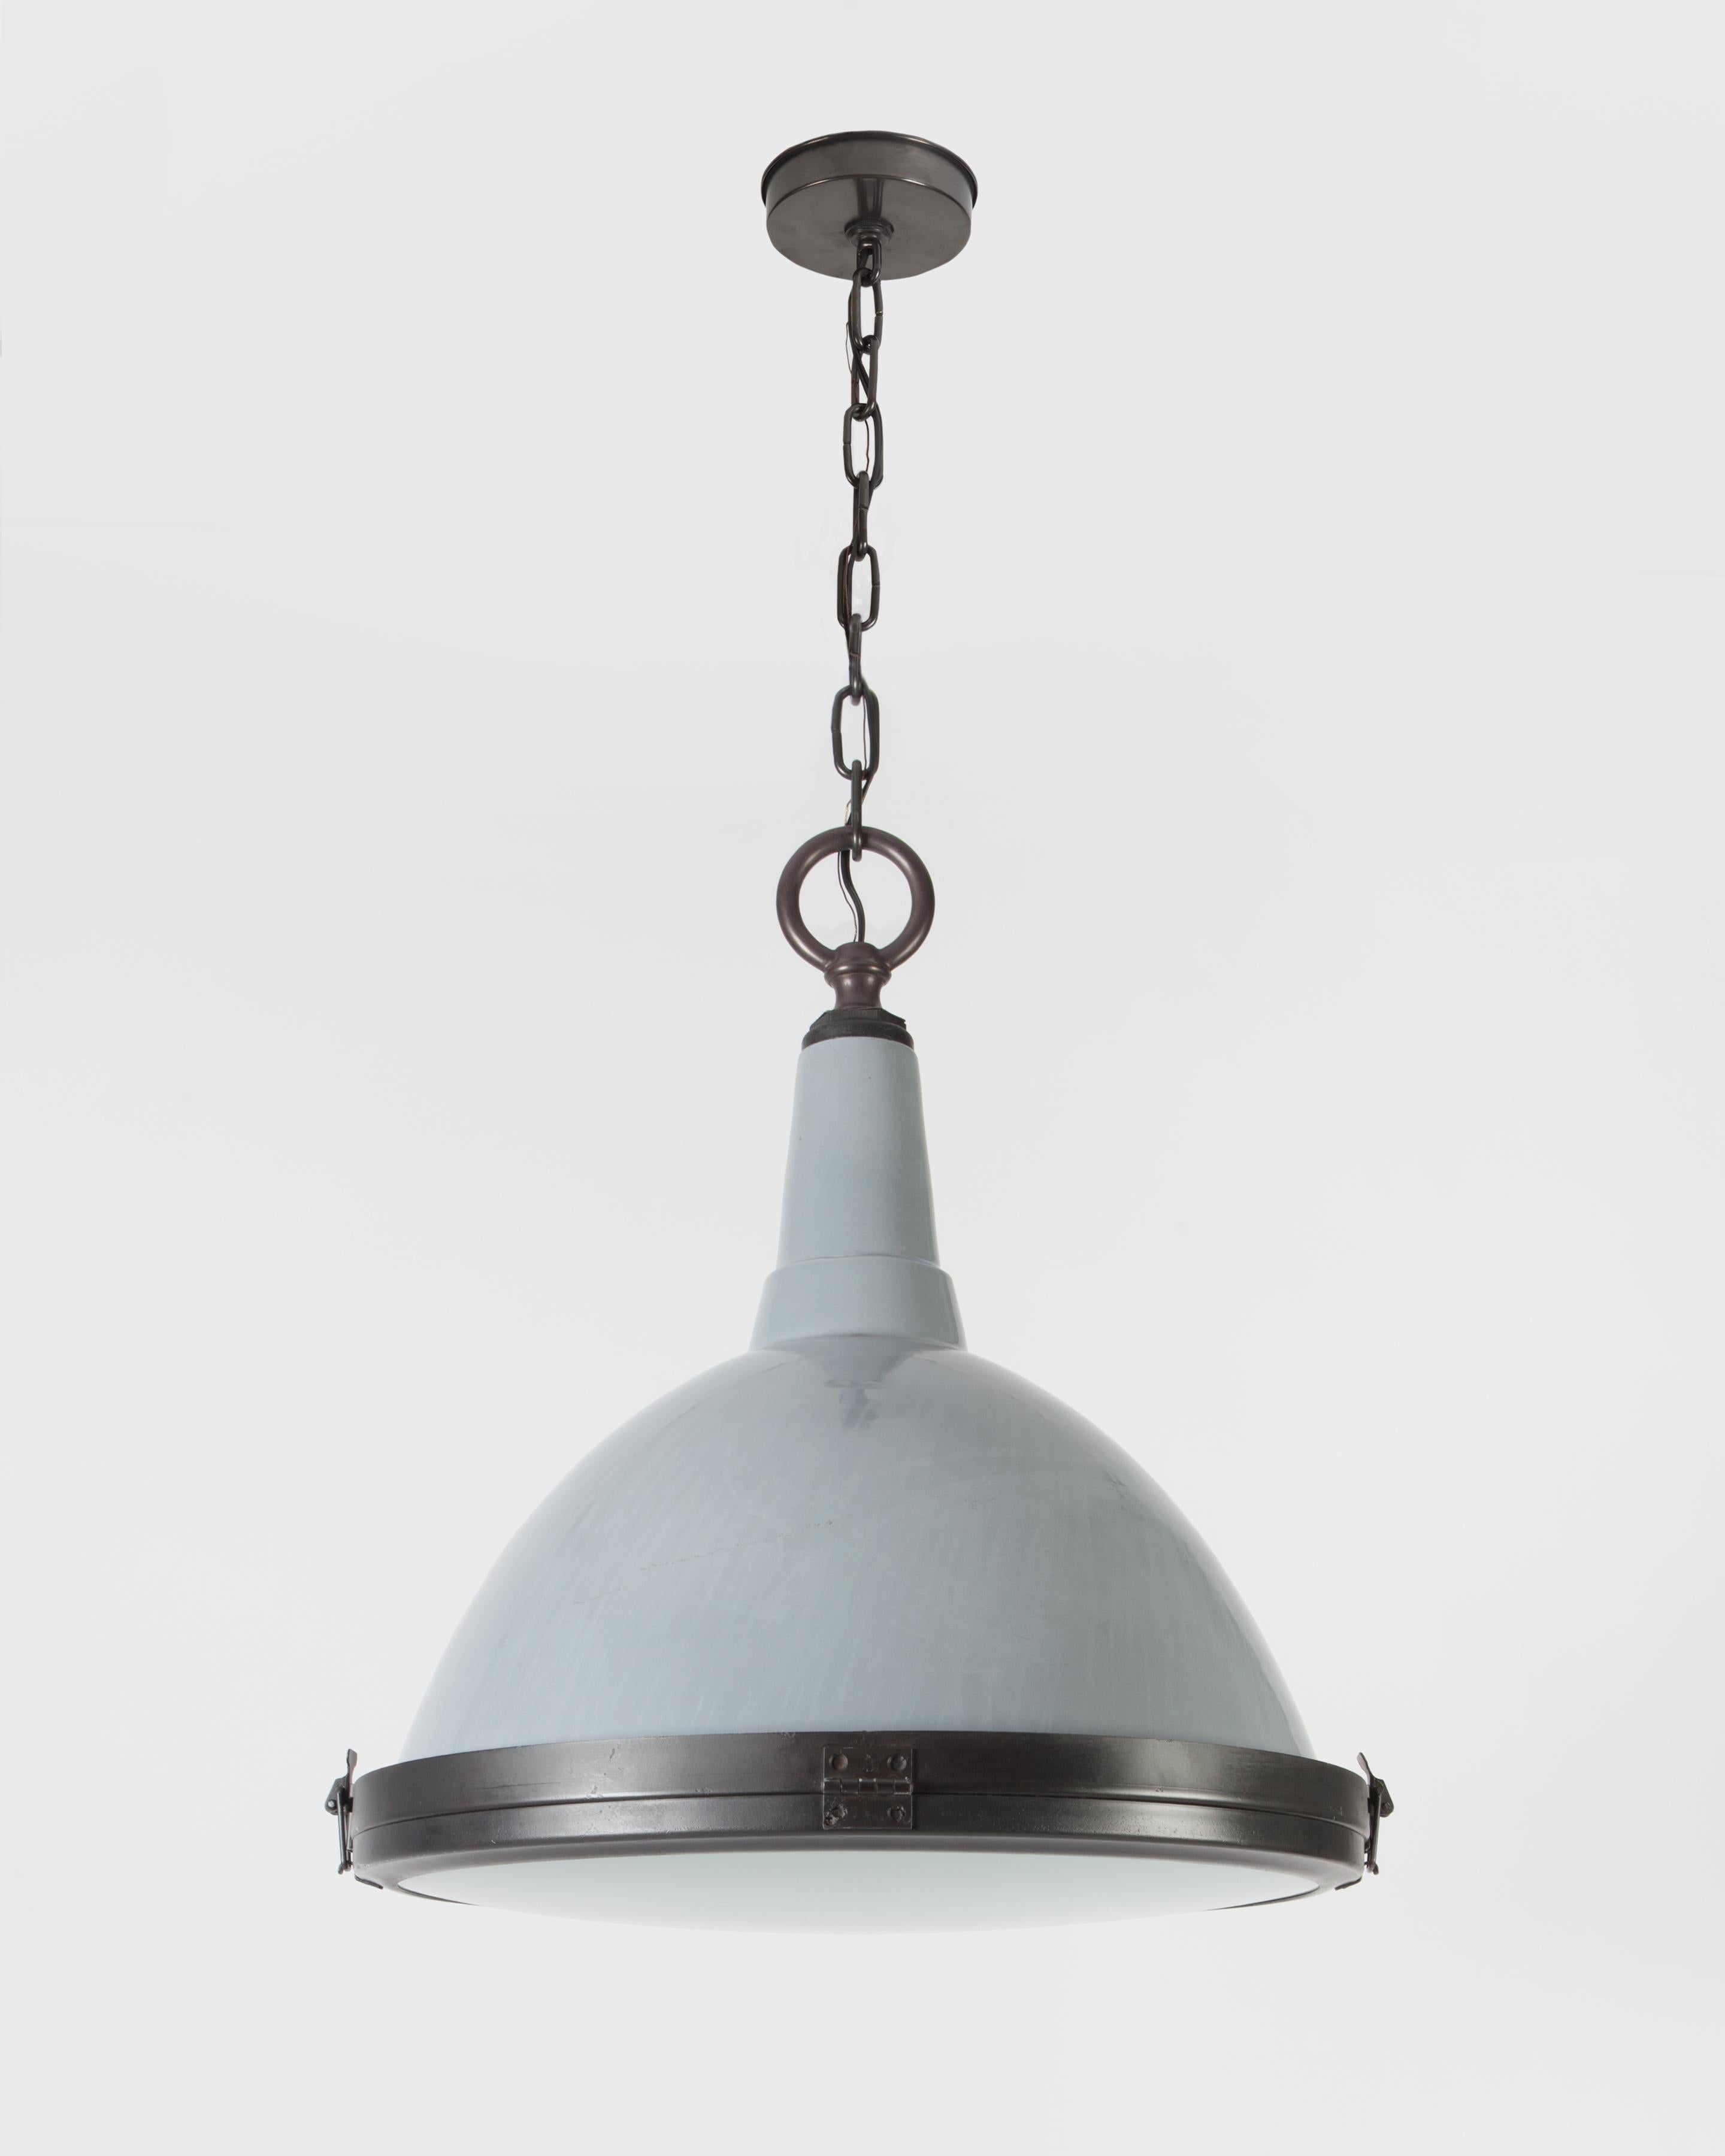 A vintage grey vitreous enameled steel pendant with darkened brass and steel fittings, circa 1950. Having a hinged bottom frame holding a frosted glass lens. Due to the antique nature of this fixture, there may be some nicks or imperfections in the